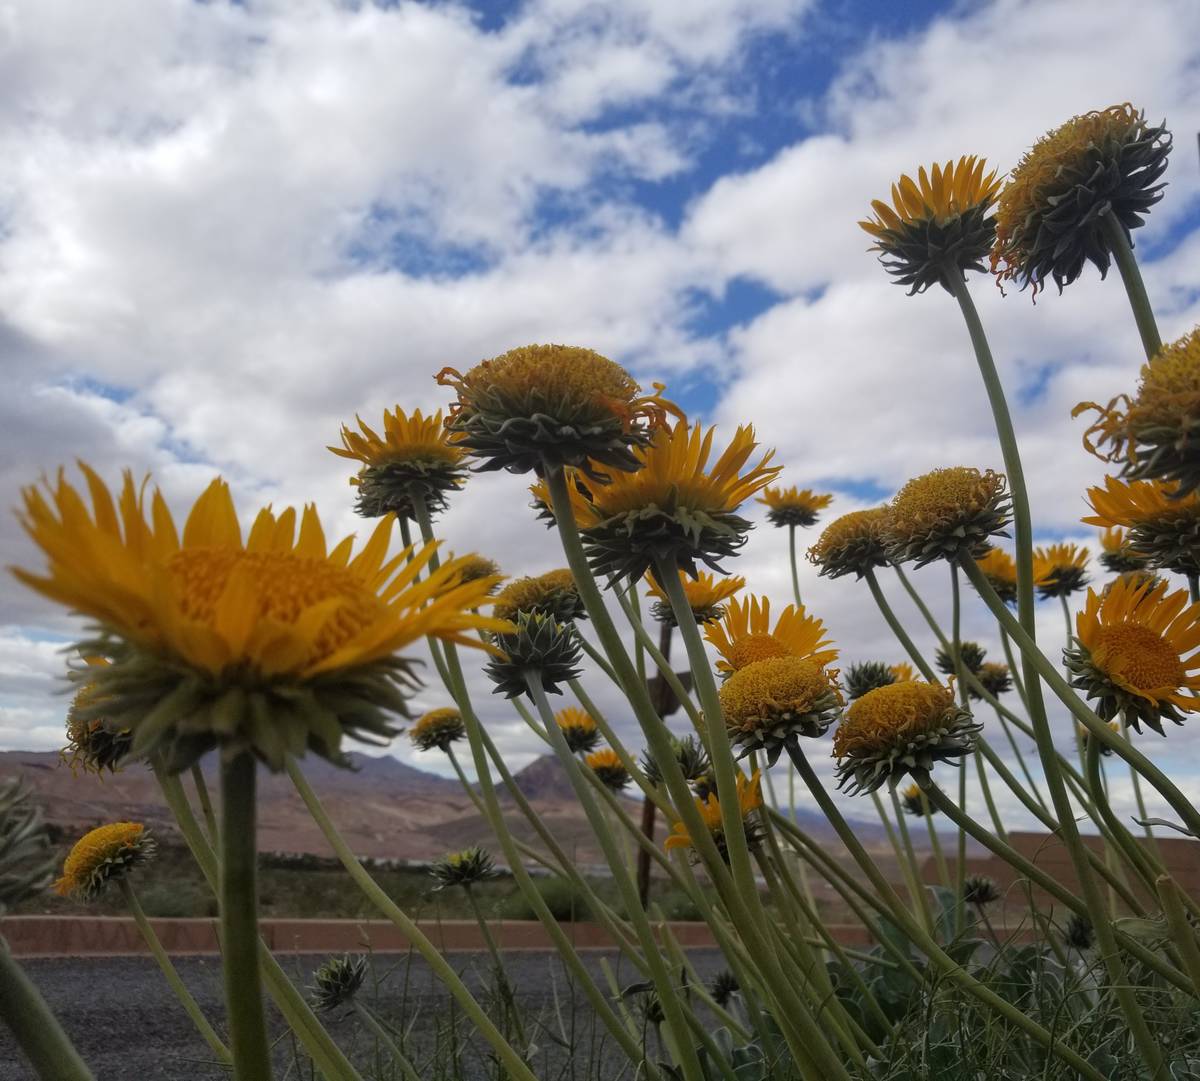 Bright yellow silverleaf sunrays were spotted in bloom Tuesday afternoon. (Natalie Burt)